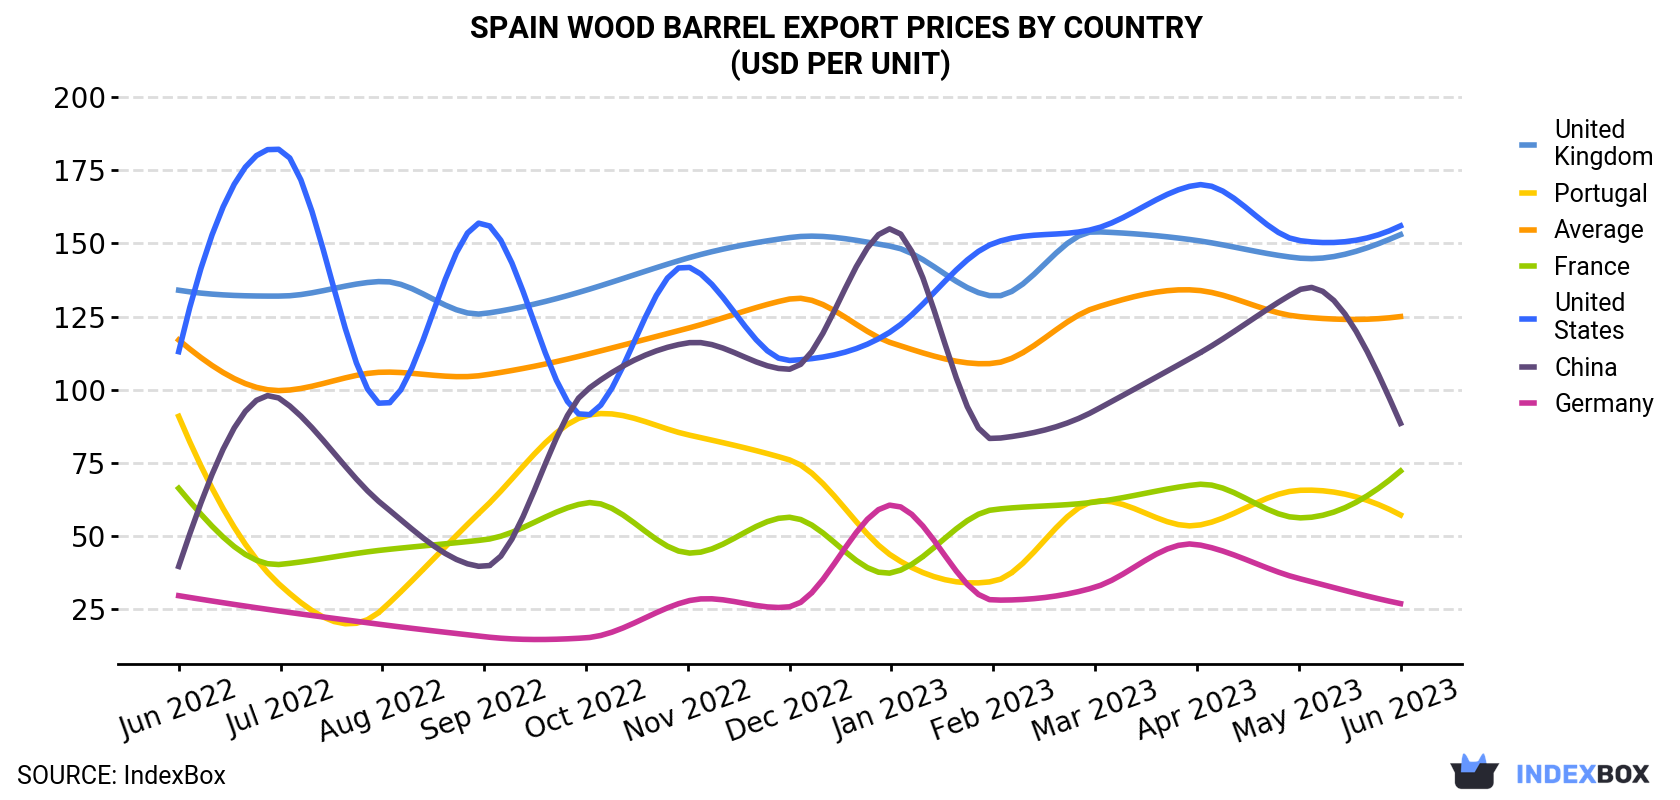 Spain Wood Barrel Export Prices By Country (USD Per Unit)